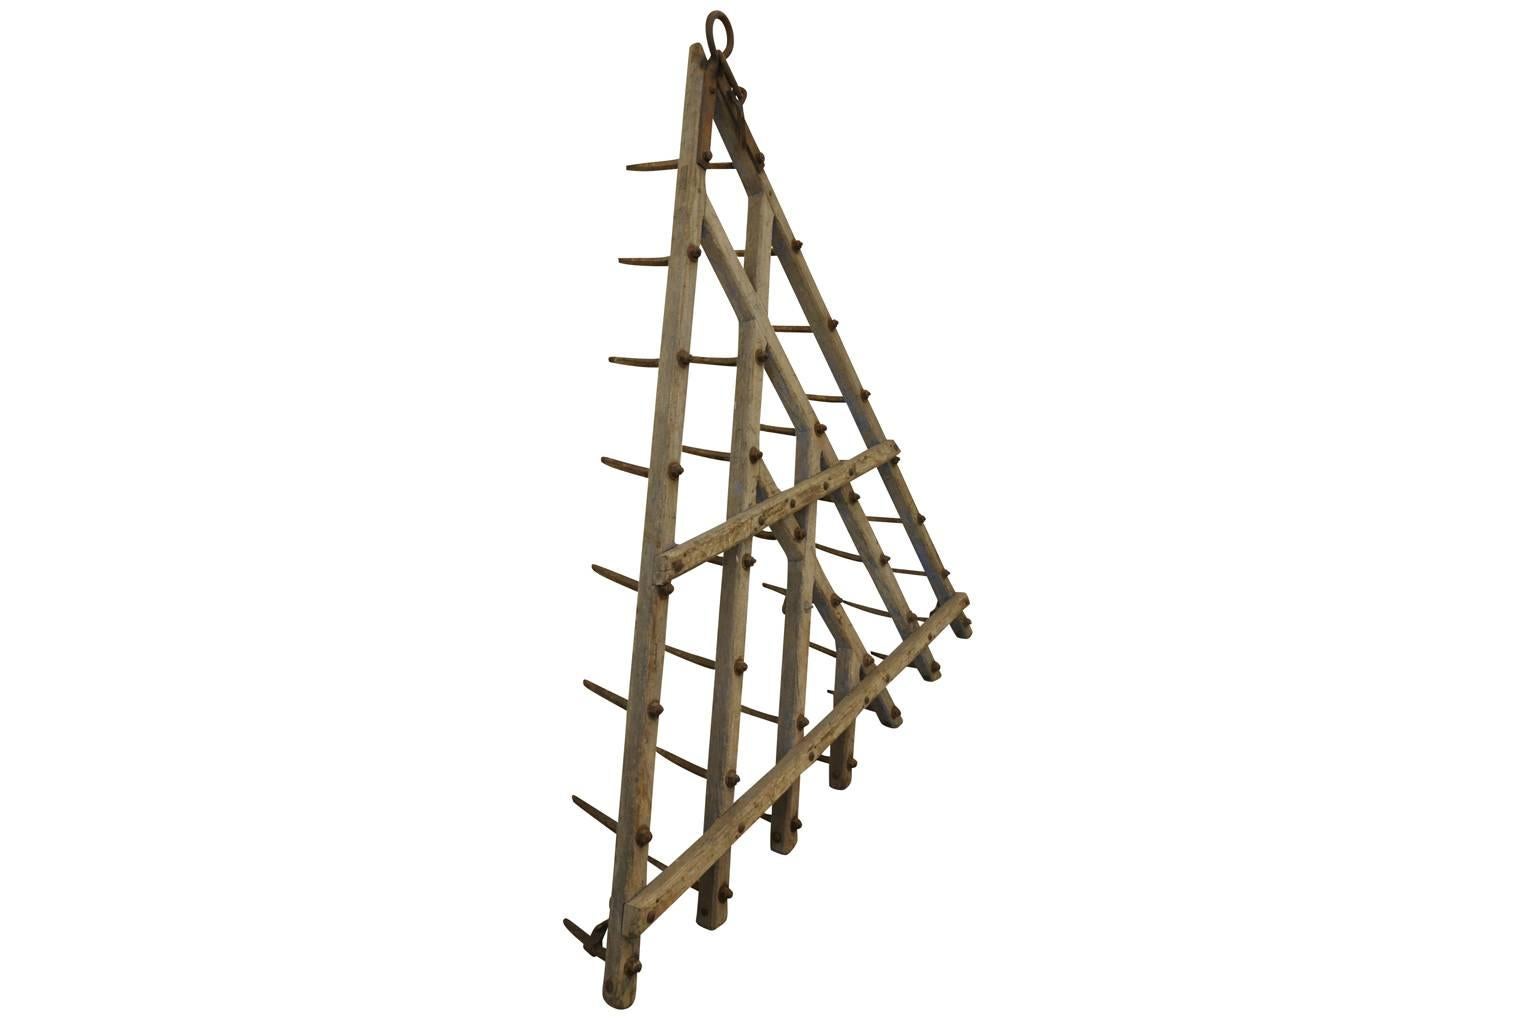 A fabulous mid-19th century plow from the Catalan region of Spain. Sturdily constructed from wood and iron. These pieces are wonderful as wall-mounted art, coat racks or converted into light fixtures.